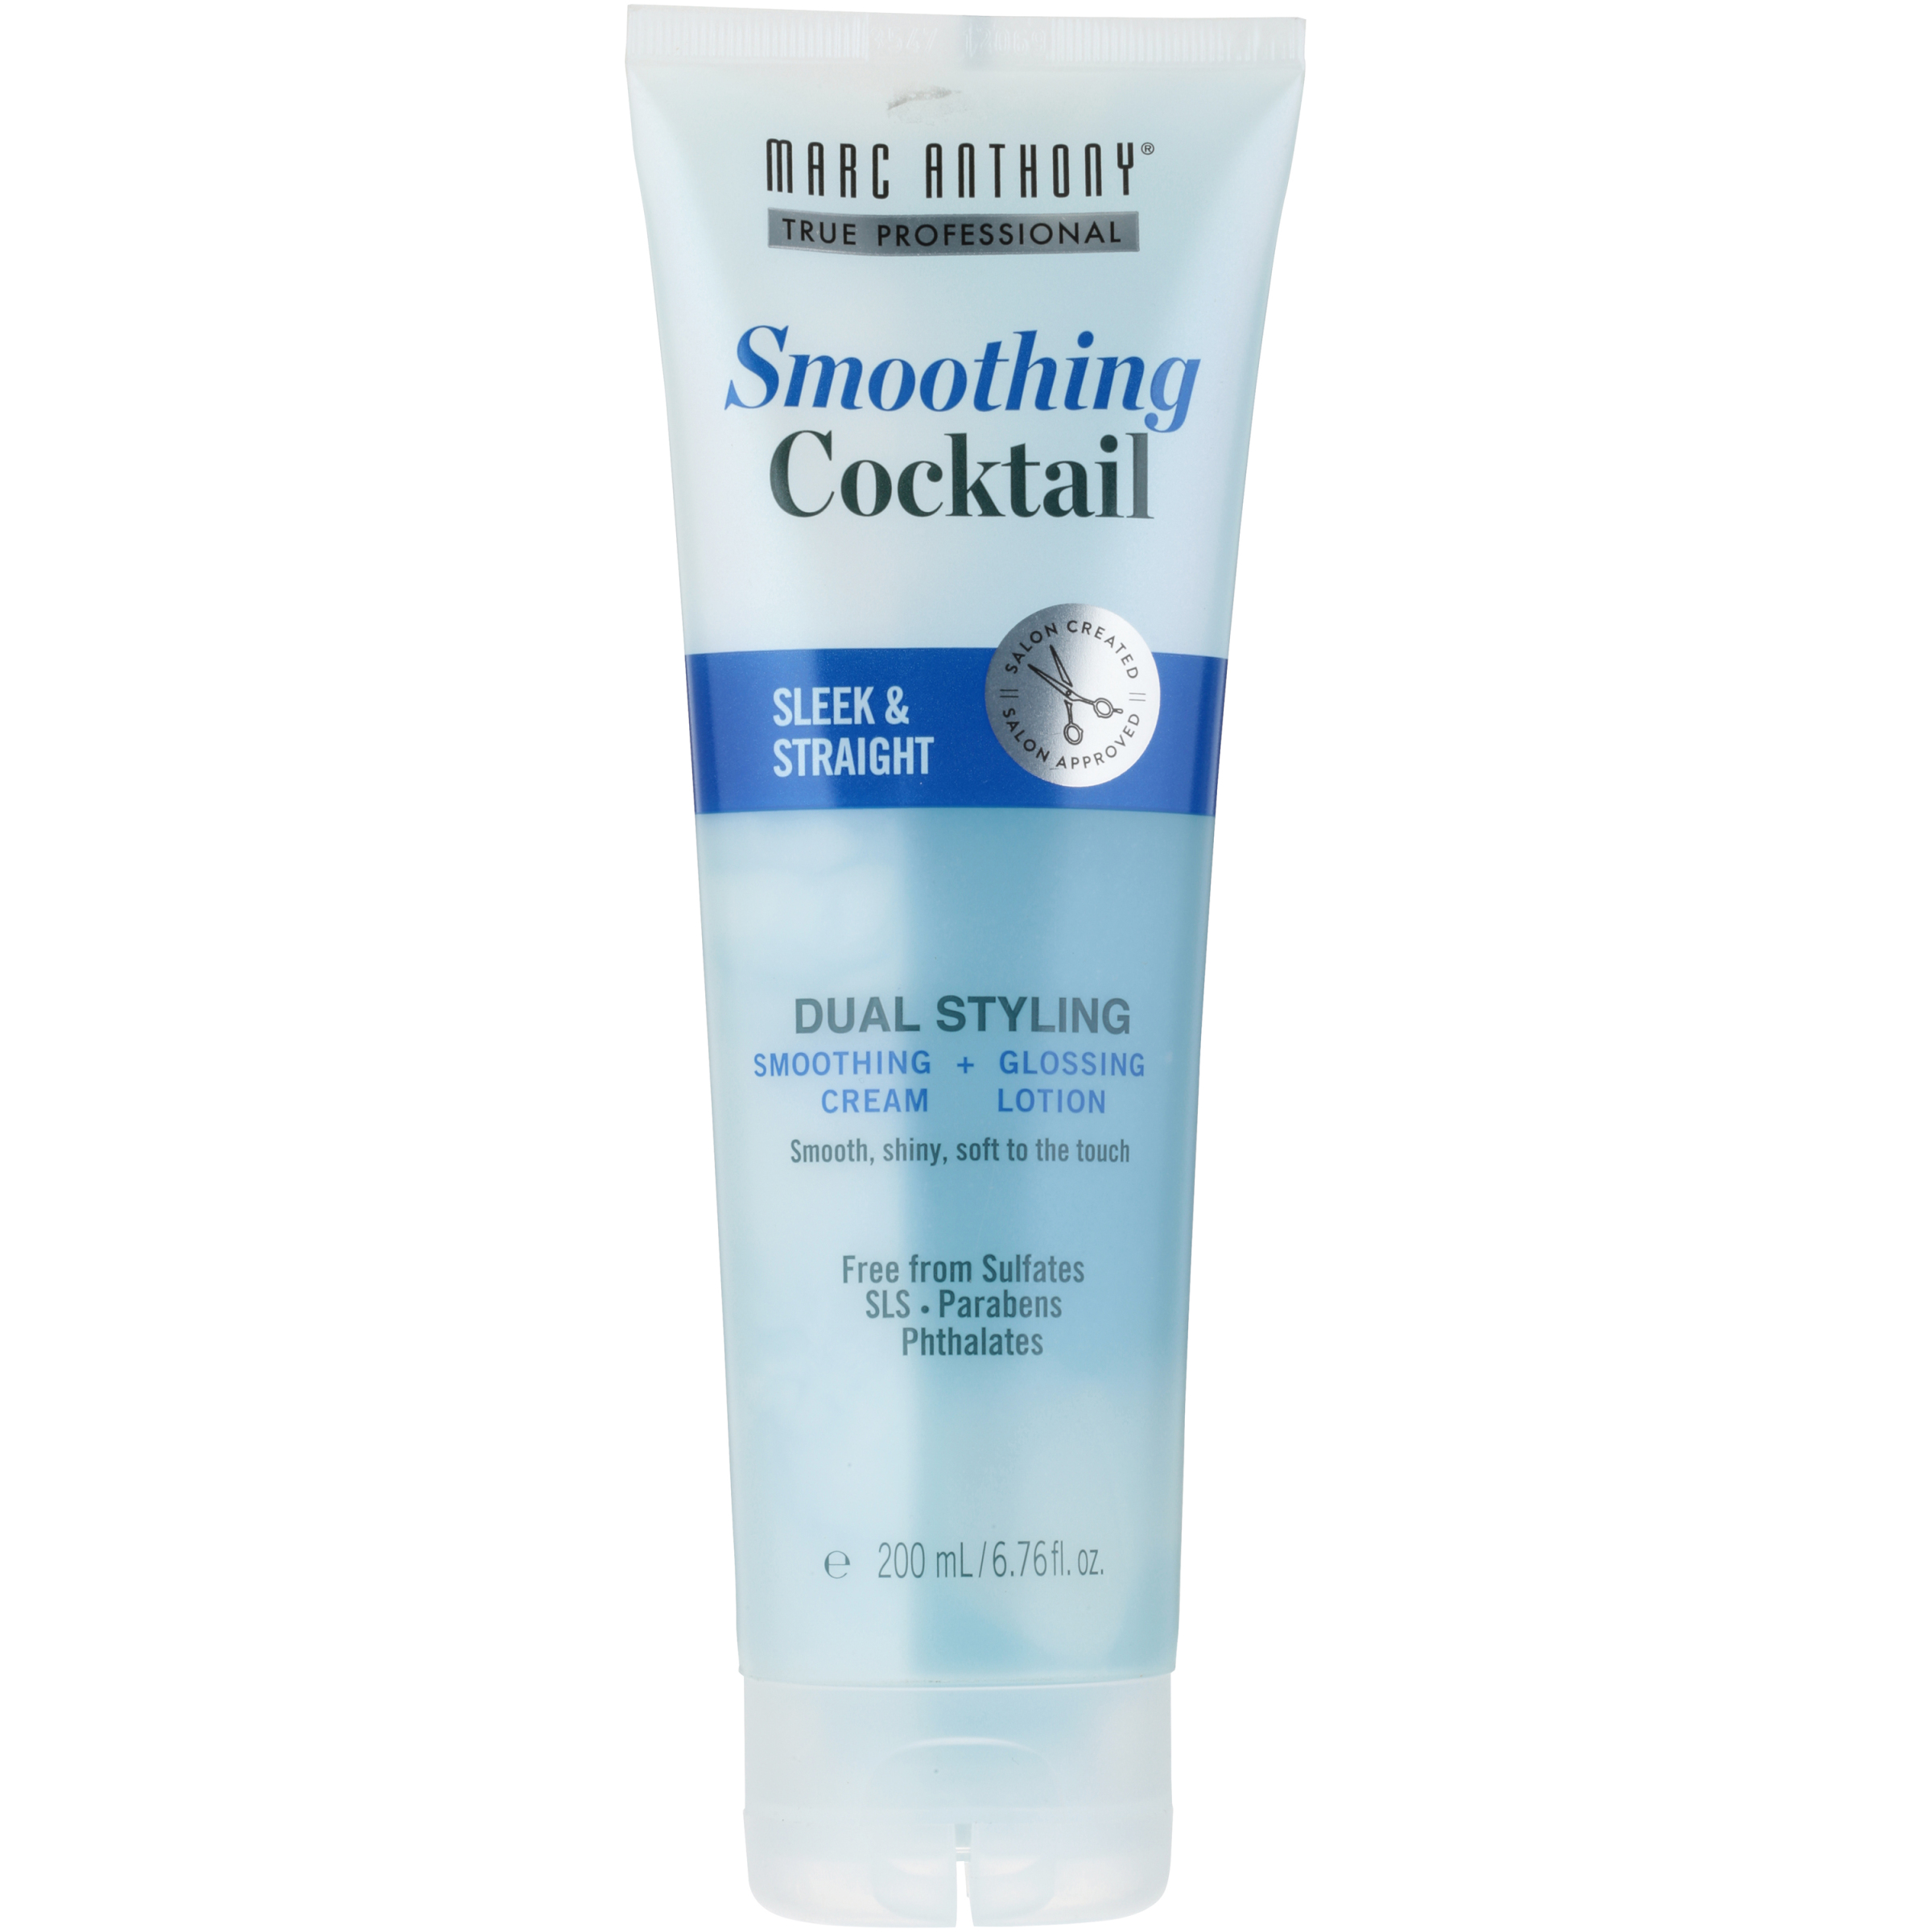 Marc Anthony Dual Styling Smoothing Cocktail Straightening Cream & Glossing Lotion, 6.8 Fl Oz - image 1 of 2